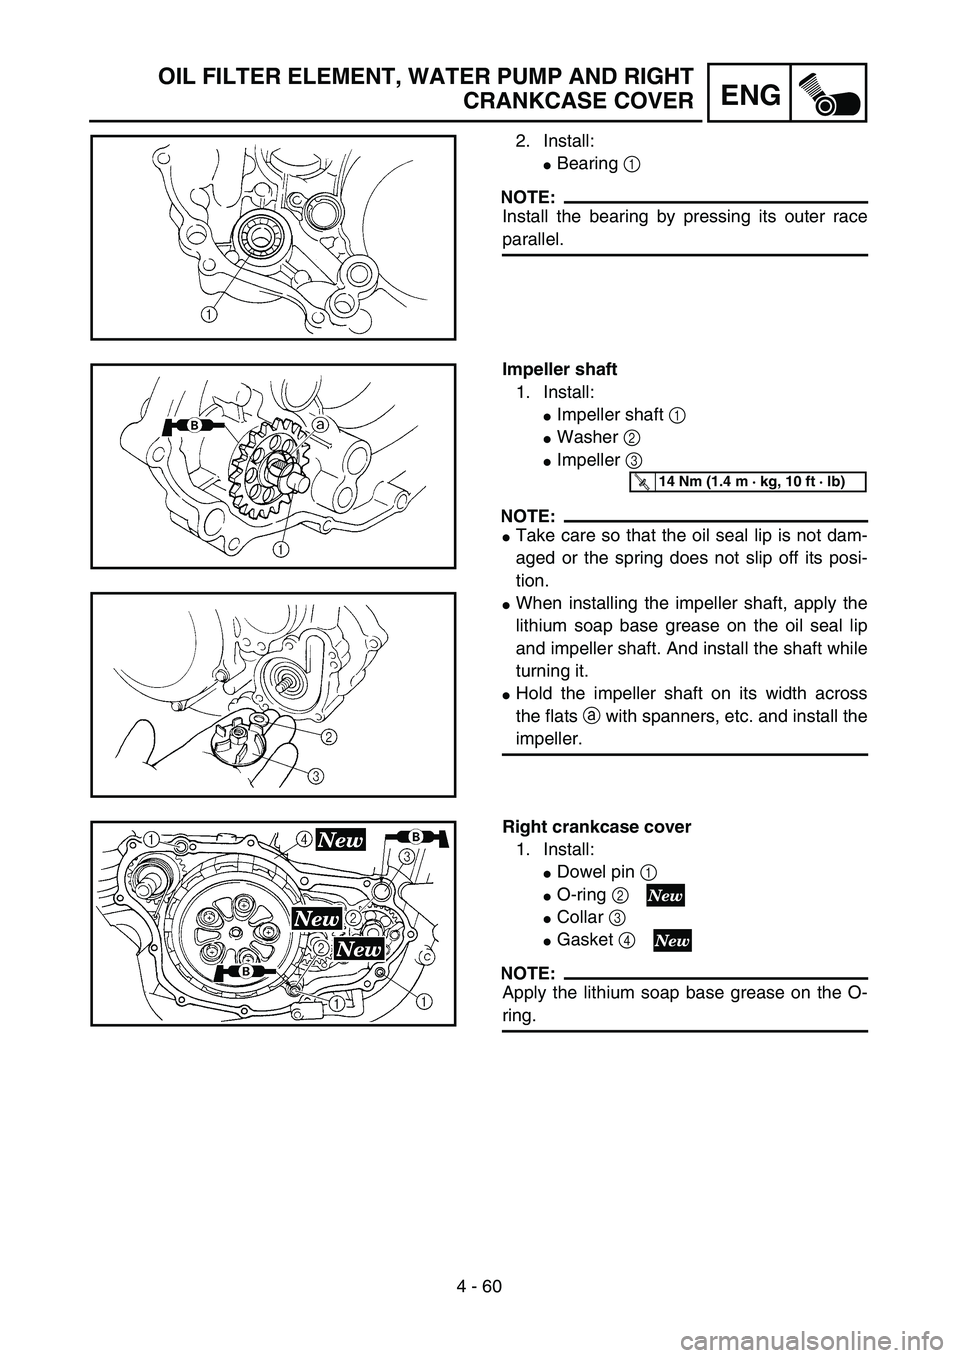 YAMAHA YZ250F 2002  Owners Manual 4 - 60
ENG
OIL FILTER ELEMENT, WATER PUMP AND RIGHT
CRANKCASE COVER
2. Install:
Bearing 1 
NOTE:
Install the bearing by pressing its outer race
parallel.
Impeller shaft
1. Install:
Impeller shaft 1 